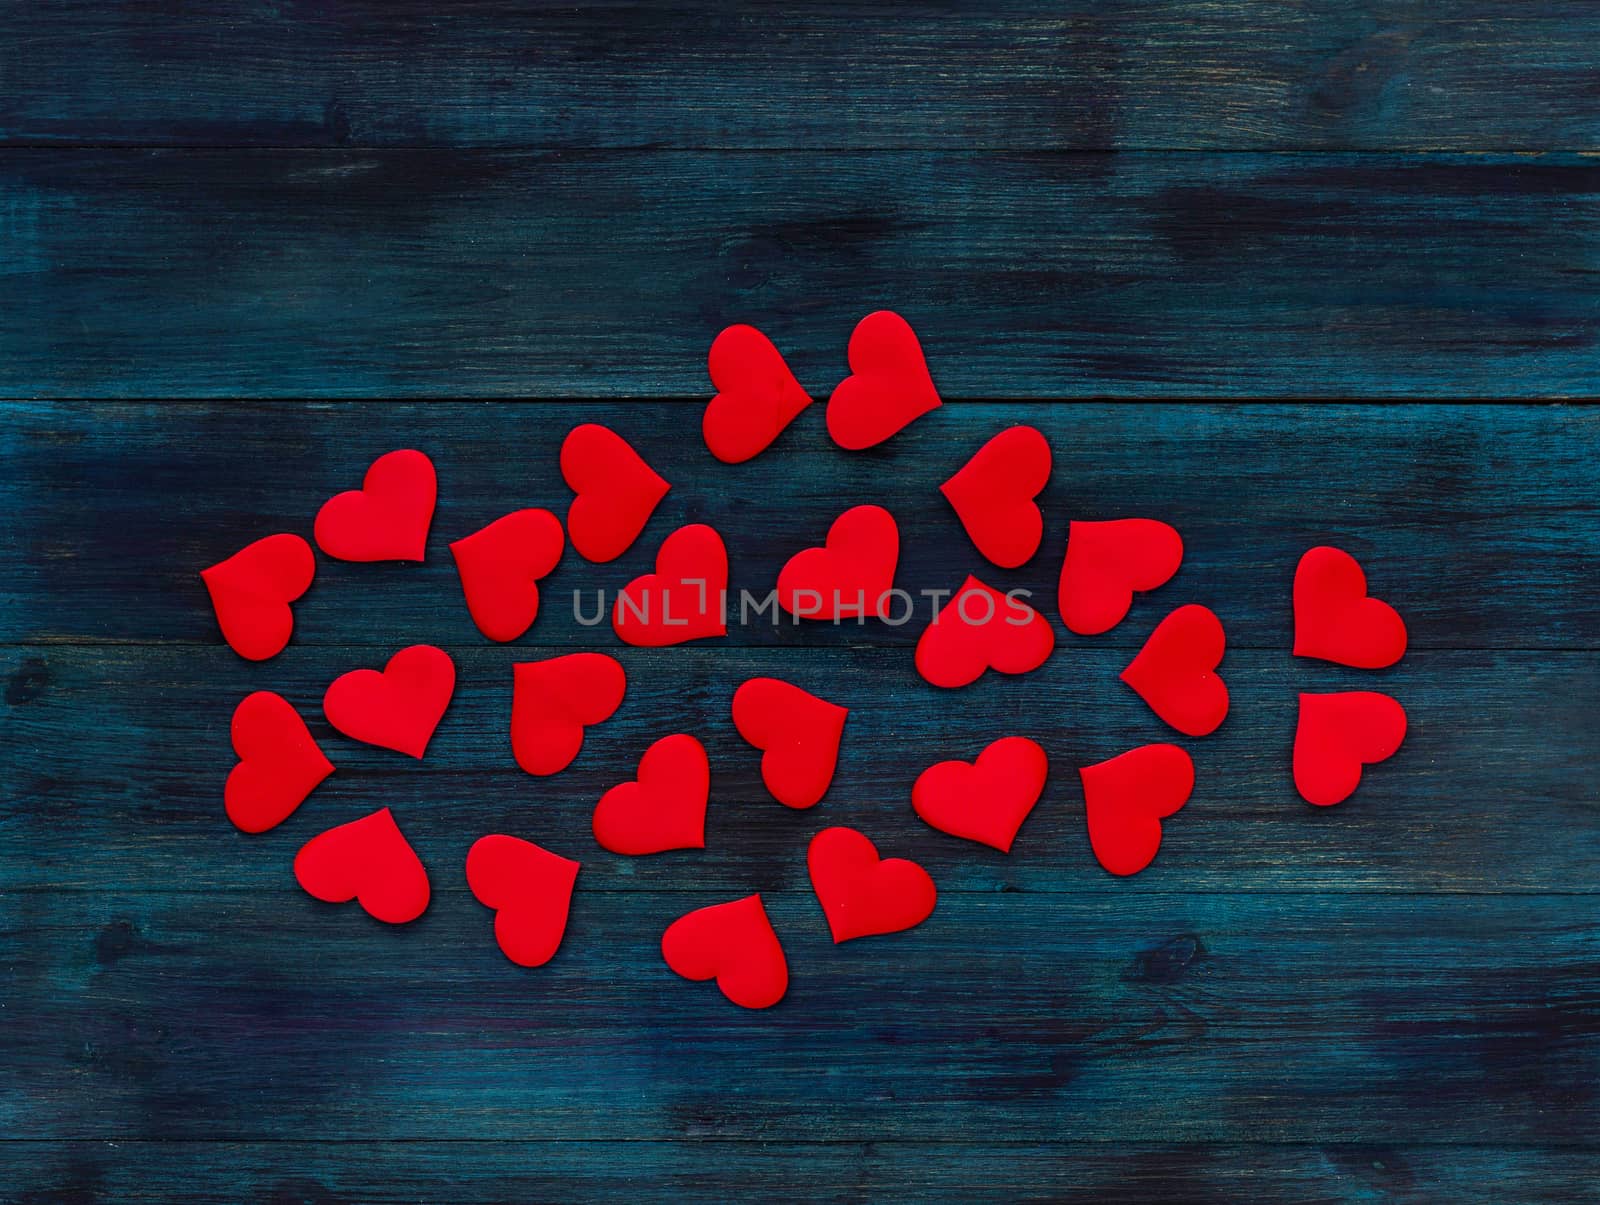 .Romantic valentine's day background red satin hearts on dark blue wooden backdrop